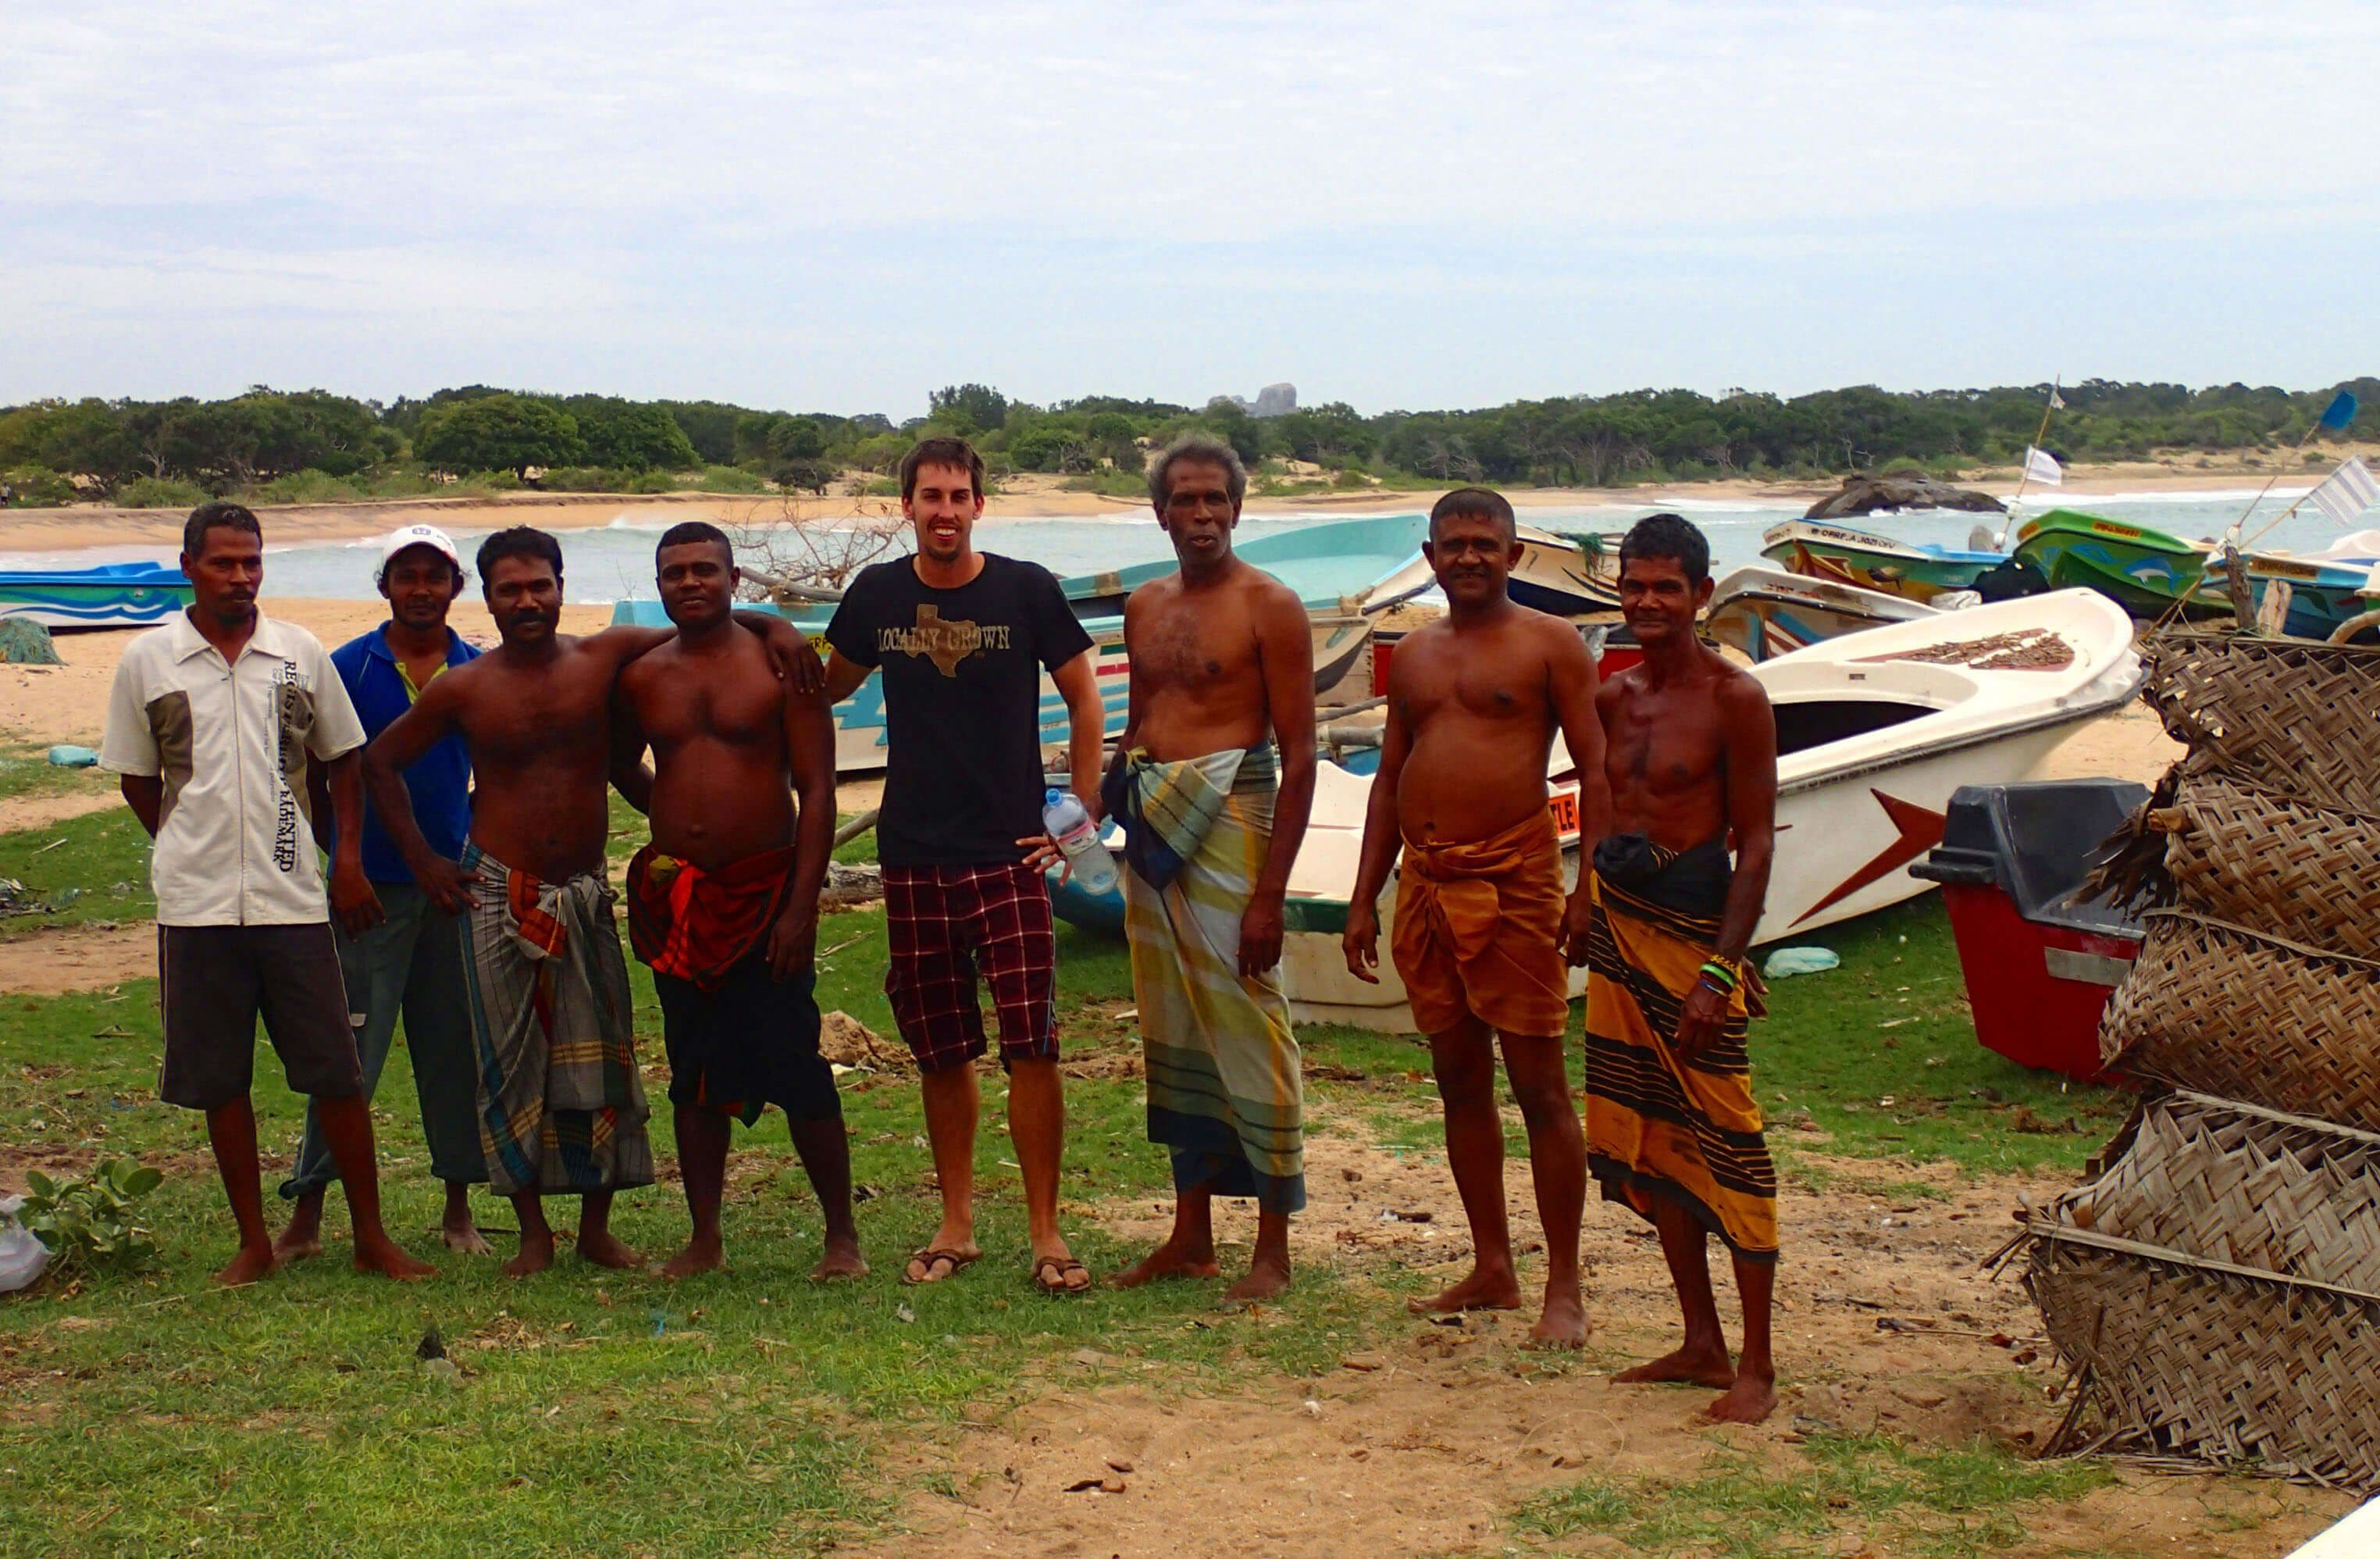 A tourist get social experience with local fishermen in Negombo Sri Lanka